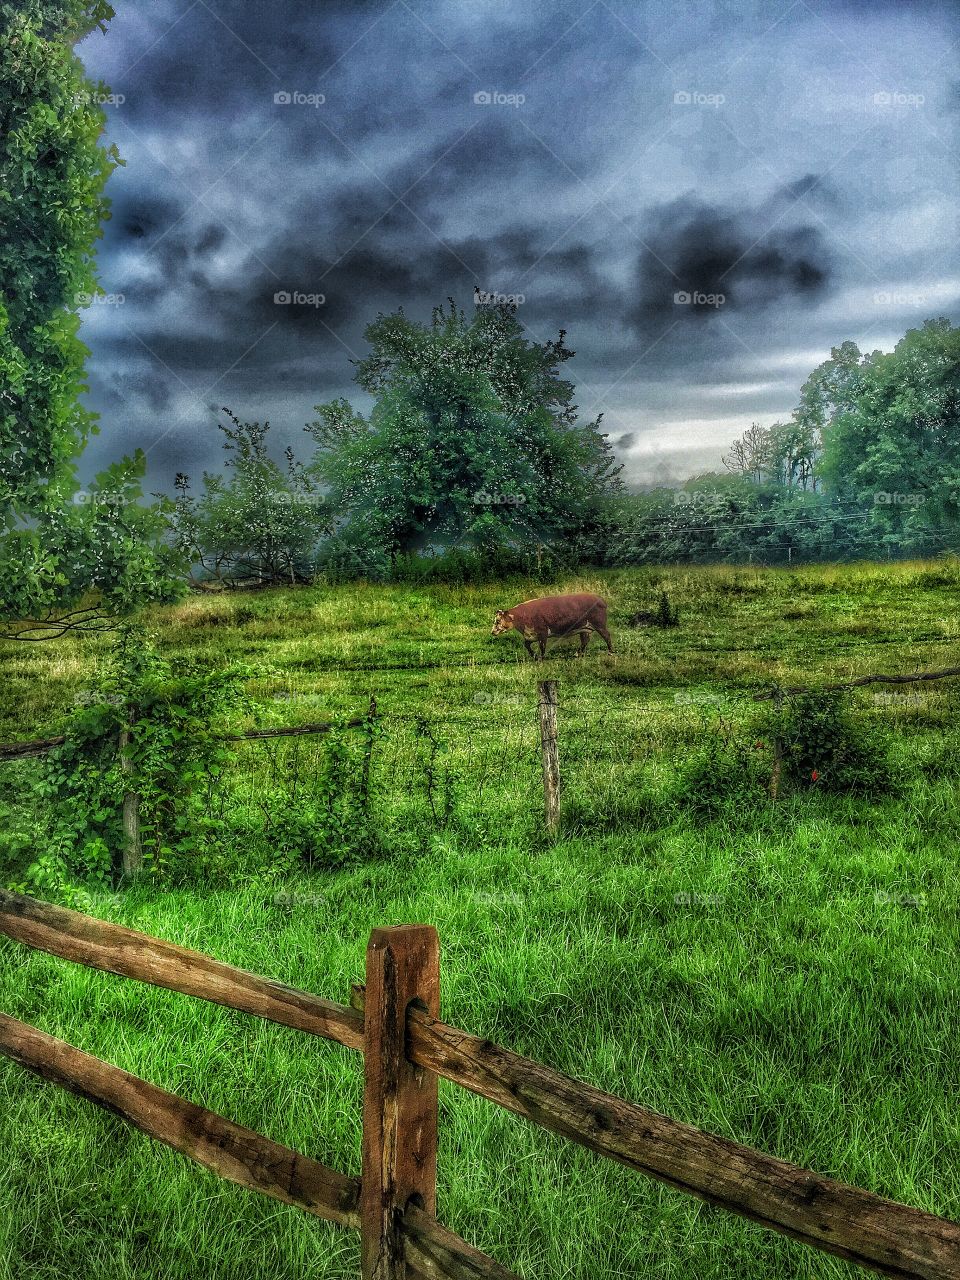 Cows out to pasture. A grazing cow